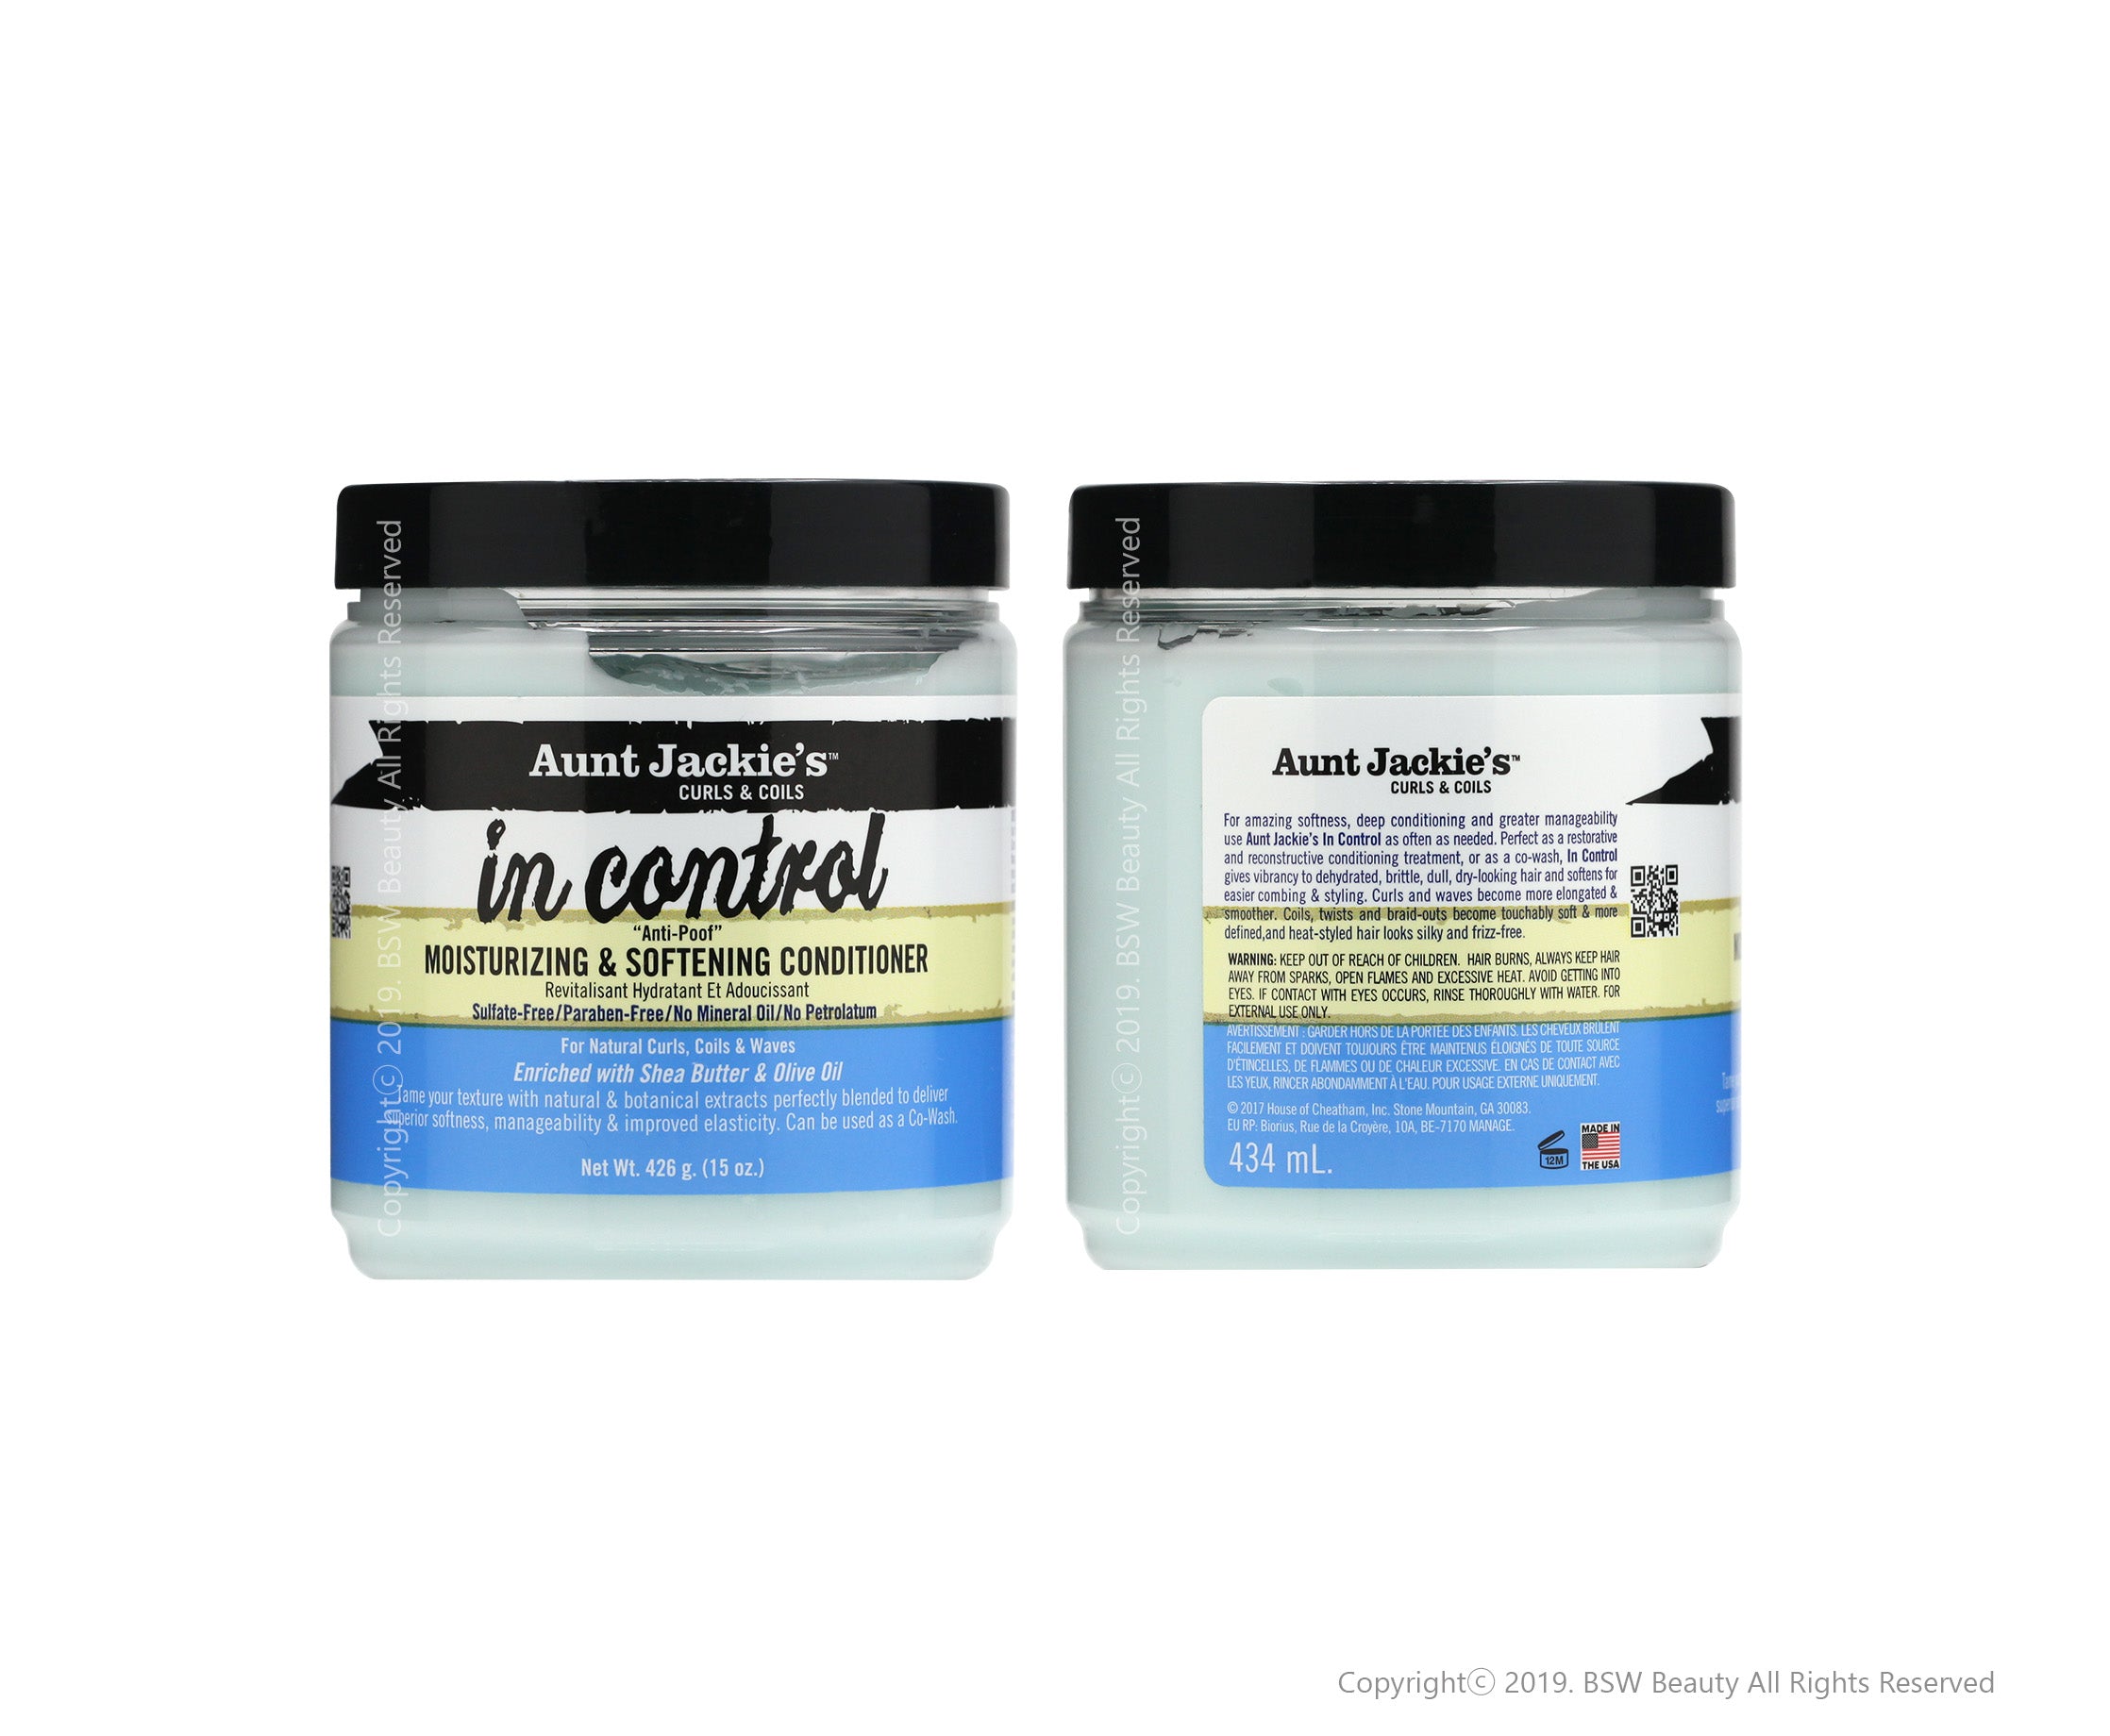 AUNT JACKIES IN CONTROL! MOISTURIZING & SOFTENING CONDITIONER 15oz